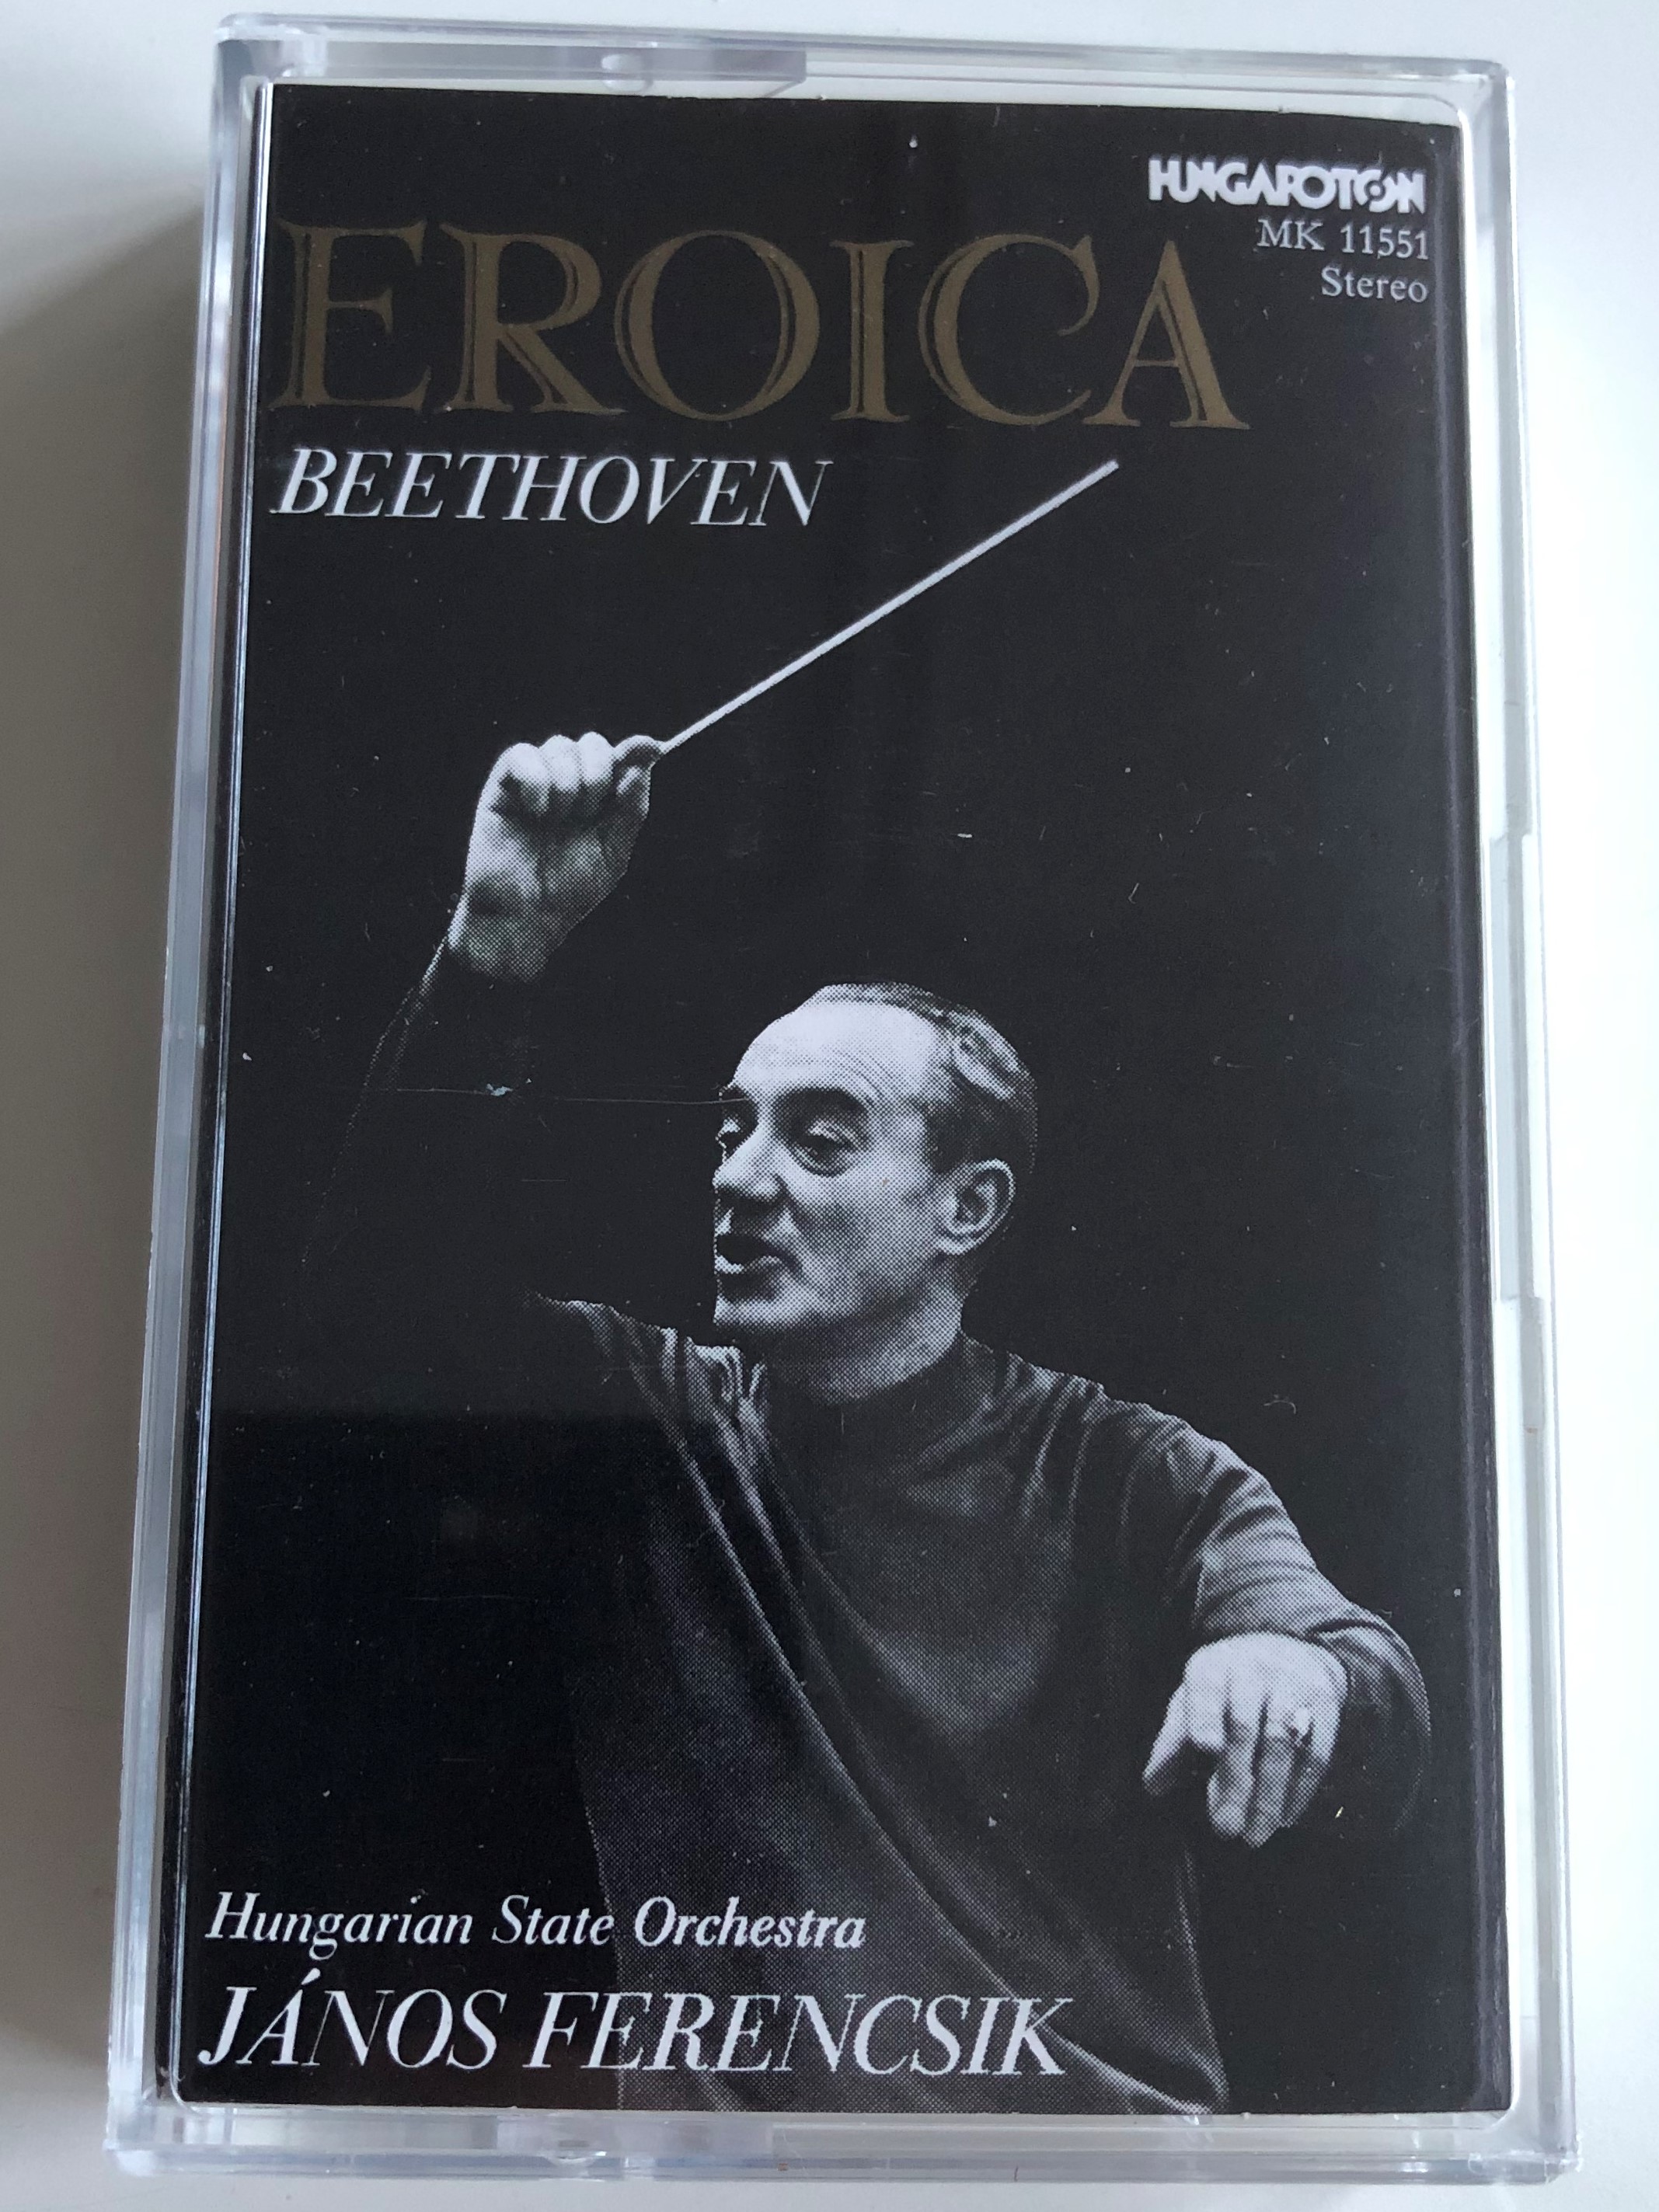 eroica-beethoven-hungarian-state-orchestra-conducted-j-nos-ferencsik-hungaroton-cassette-stereo-mk-11551-1-.jpg